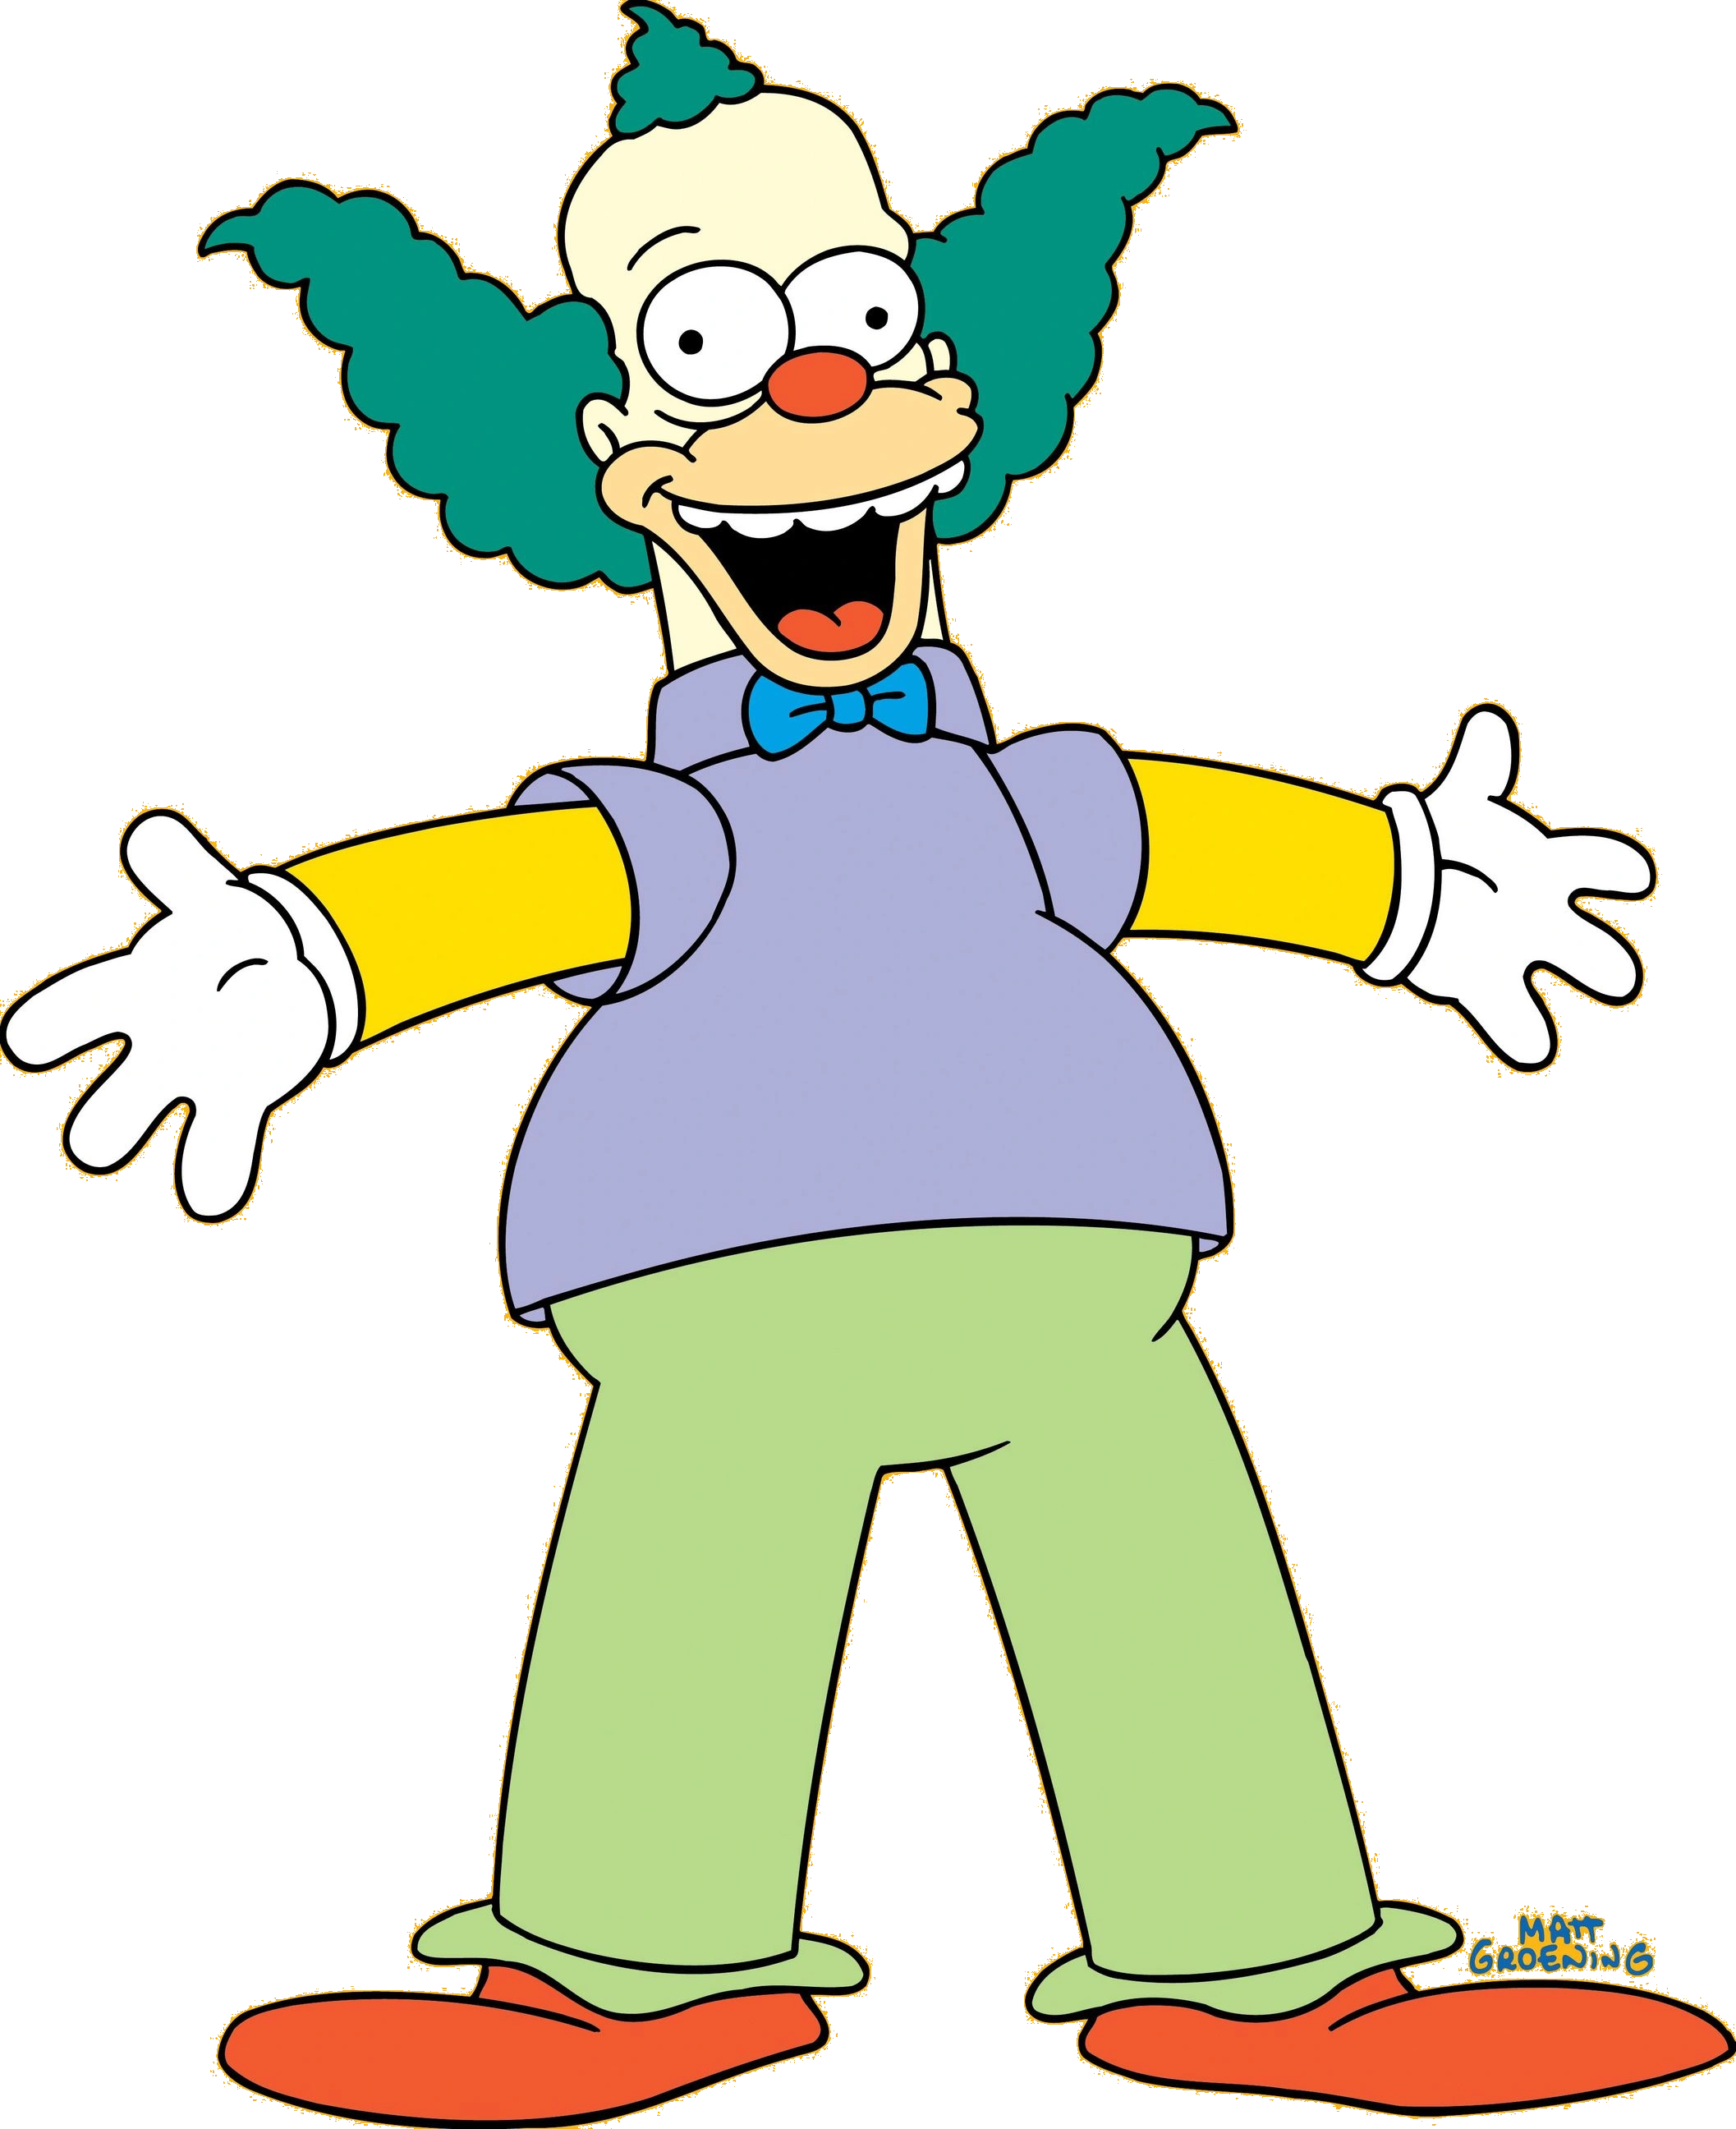 Krusty from The Simpsons